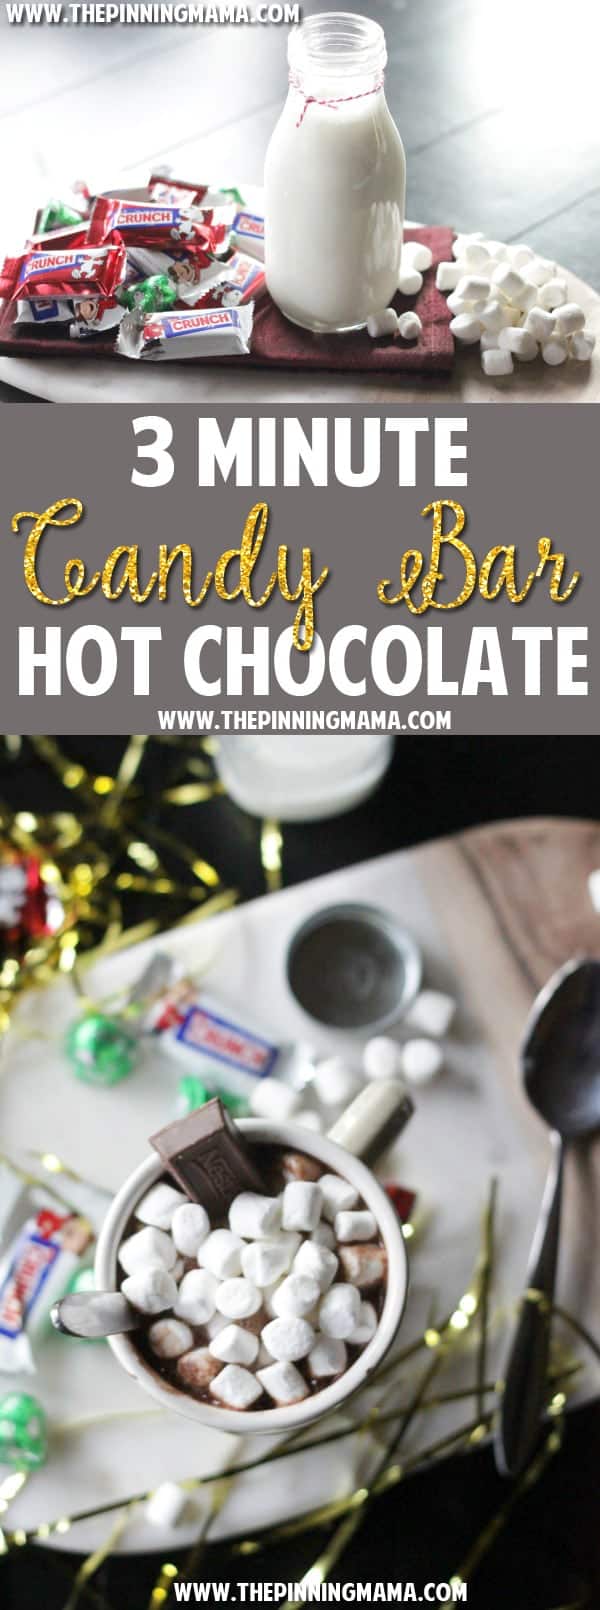 3 Minute Candy Bar Hot Chocolate Recipe- I guess this is what you do with all the candy from the stockings!  This sounds so delicious and easy for a cold night!